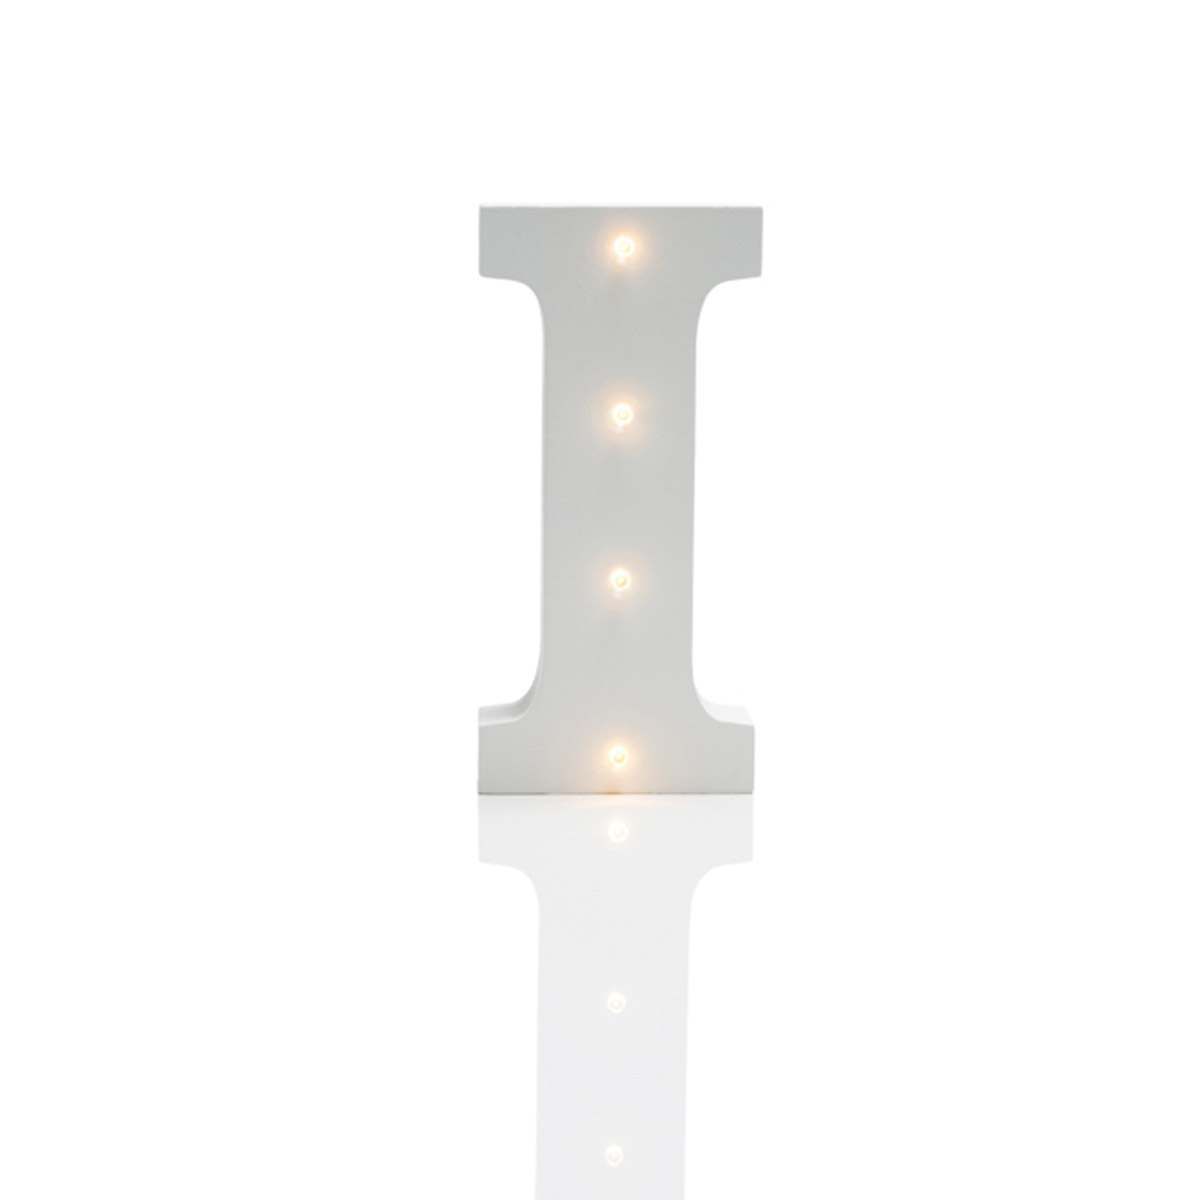 Alphabet 'I' Marquee Battery Light Up Circus Letter, Warm White LEDs, 16cm image 1